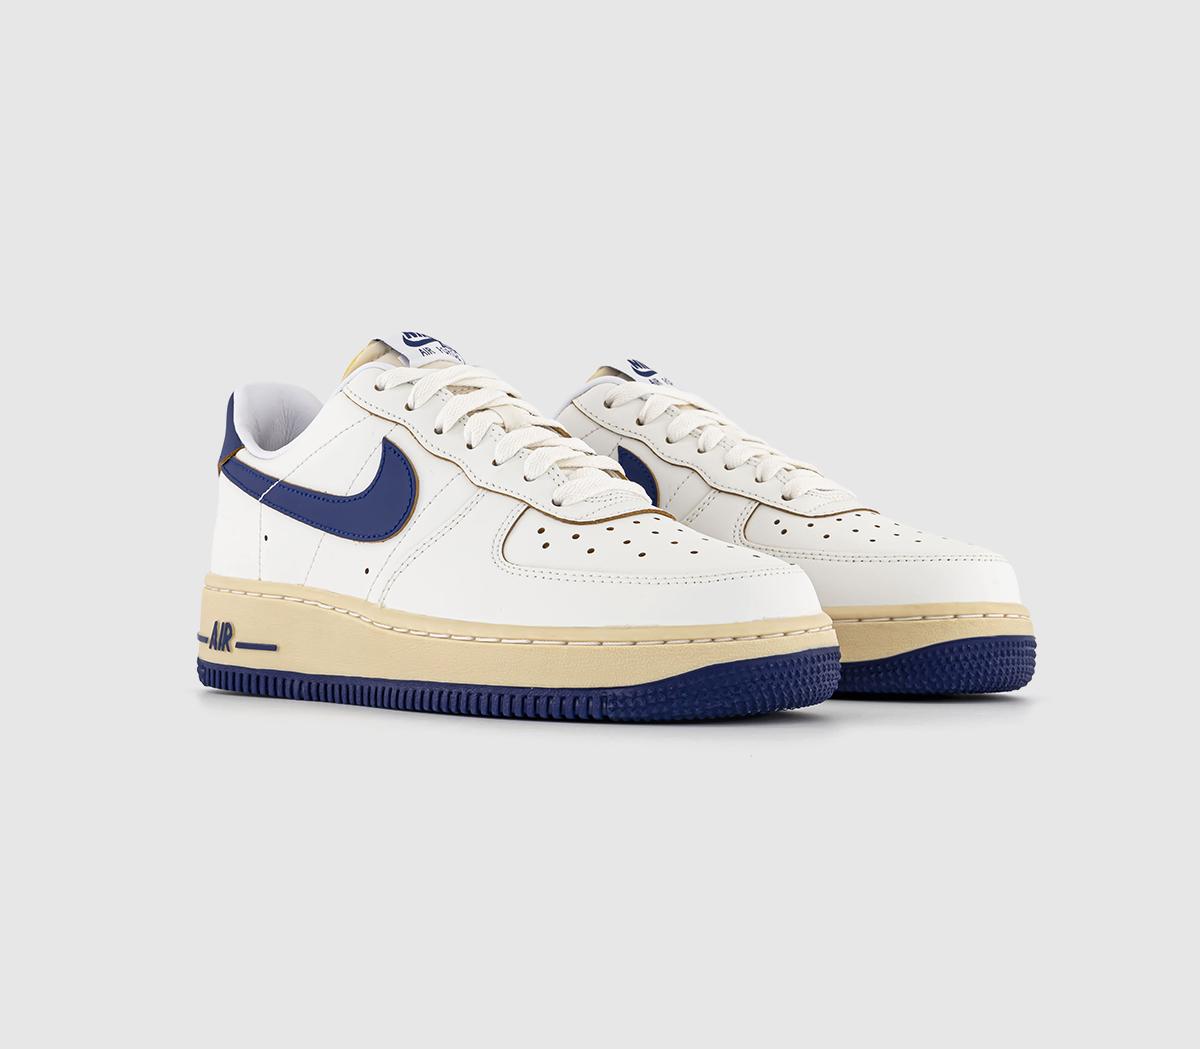 Nike Womens Air Force 1 07 Trainers Sail Deep Royal Blue Pale Vanilla Gold Suede White, 8.5